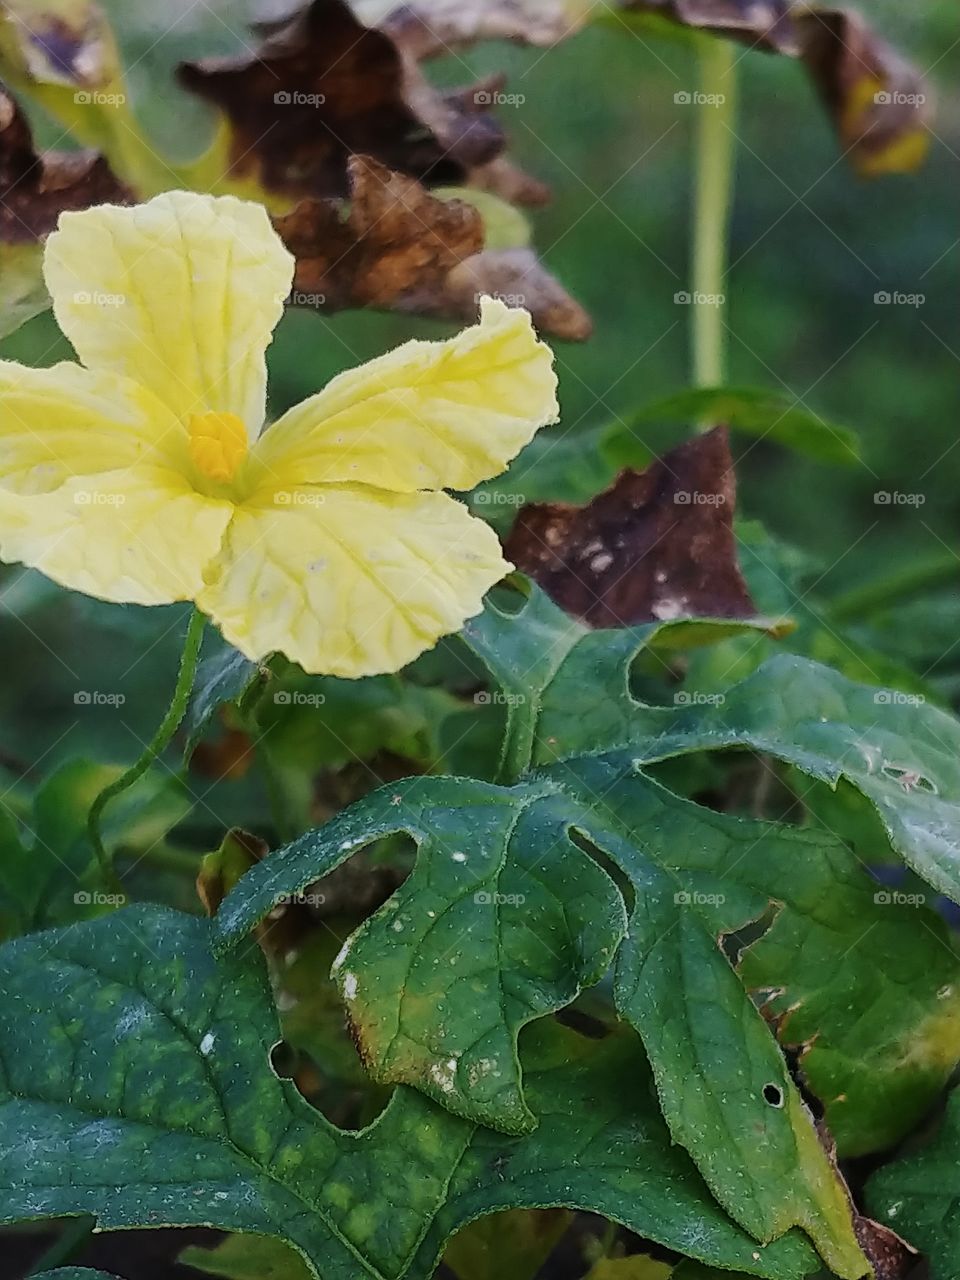 Close-up of a yellow flower with green leaves and dying brown leaves wrapping around a chain link fence.